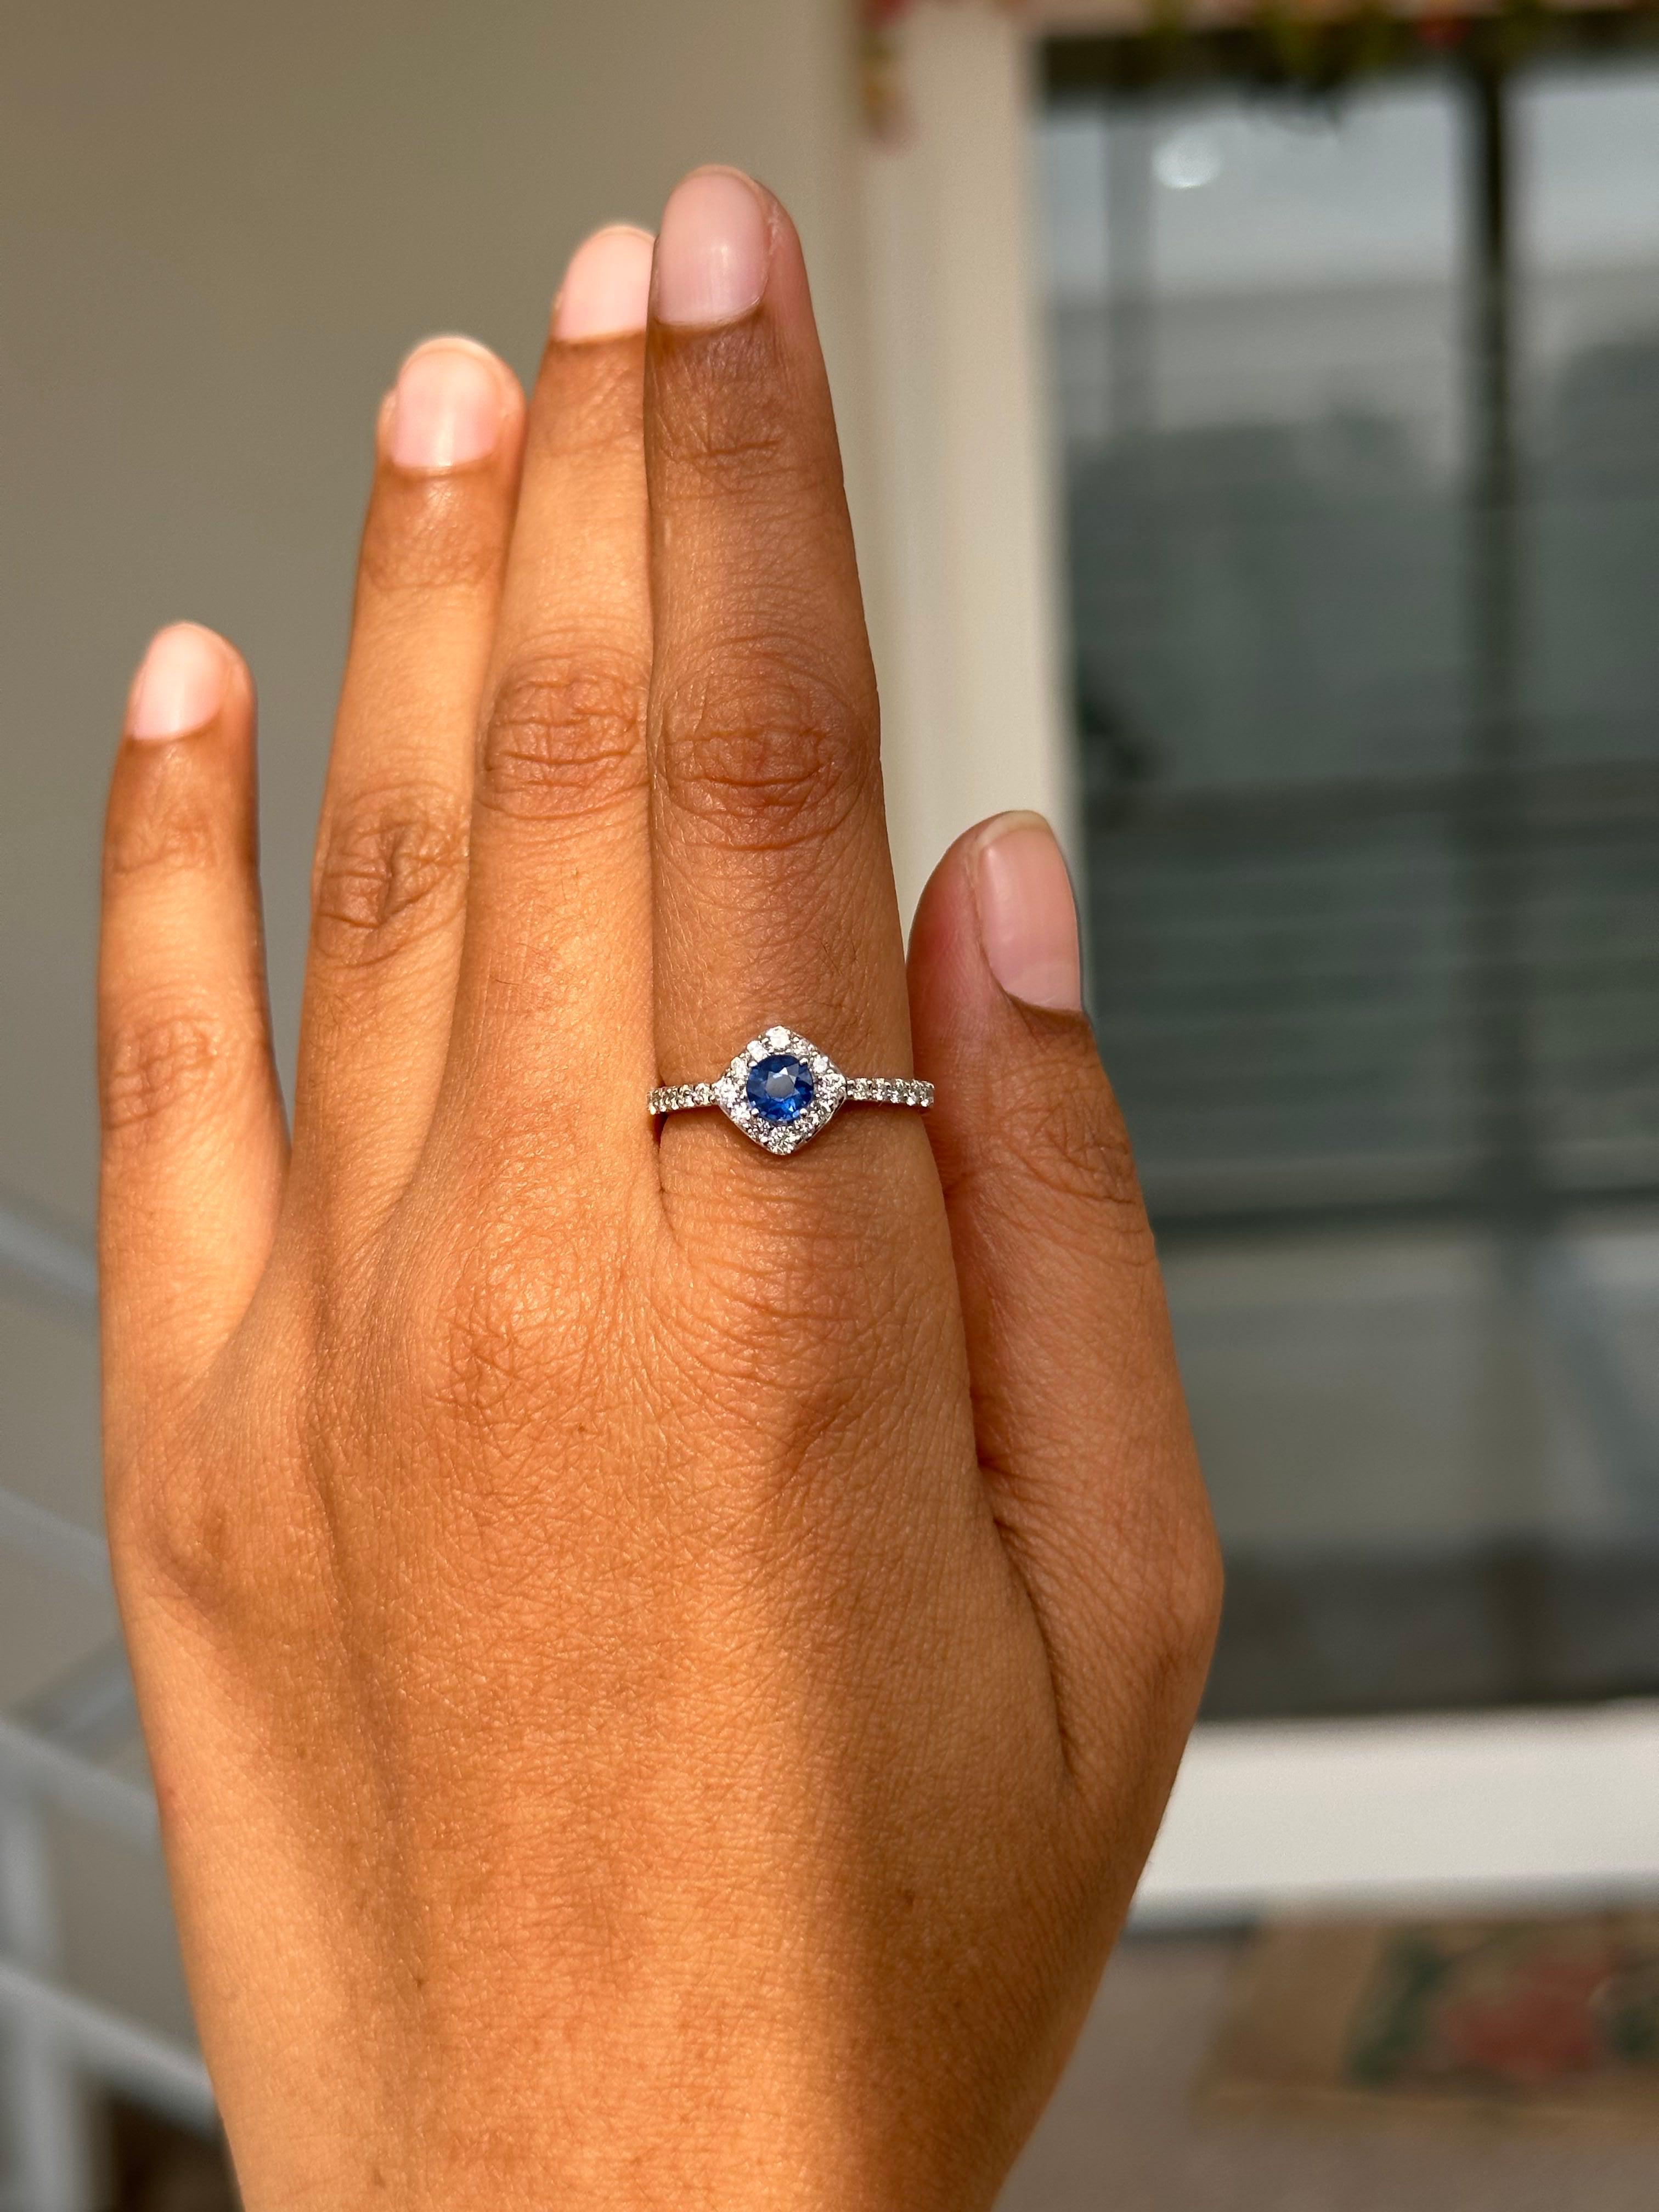 For Sale:  Royal Blue Sapphire with Halo Diamond Ring Crafted in Solid 14k White Gold 13